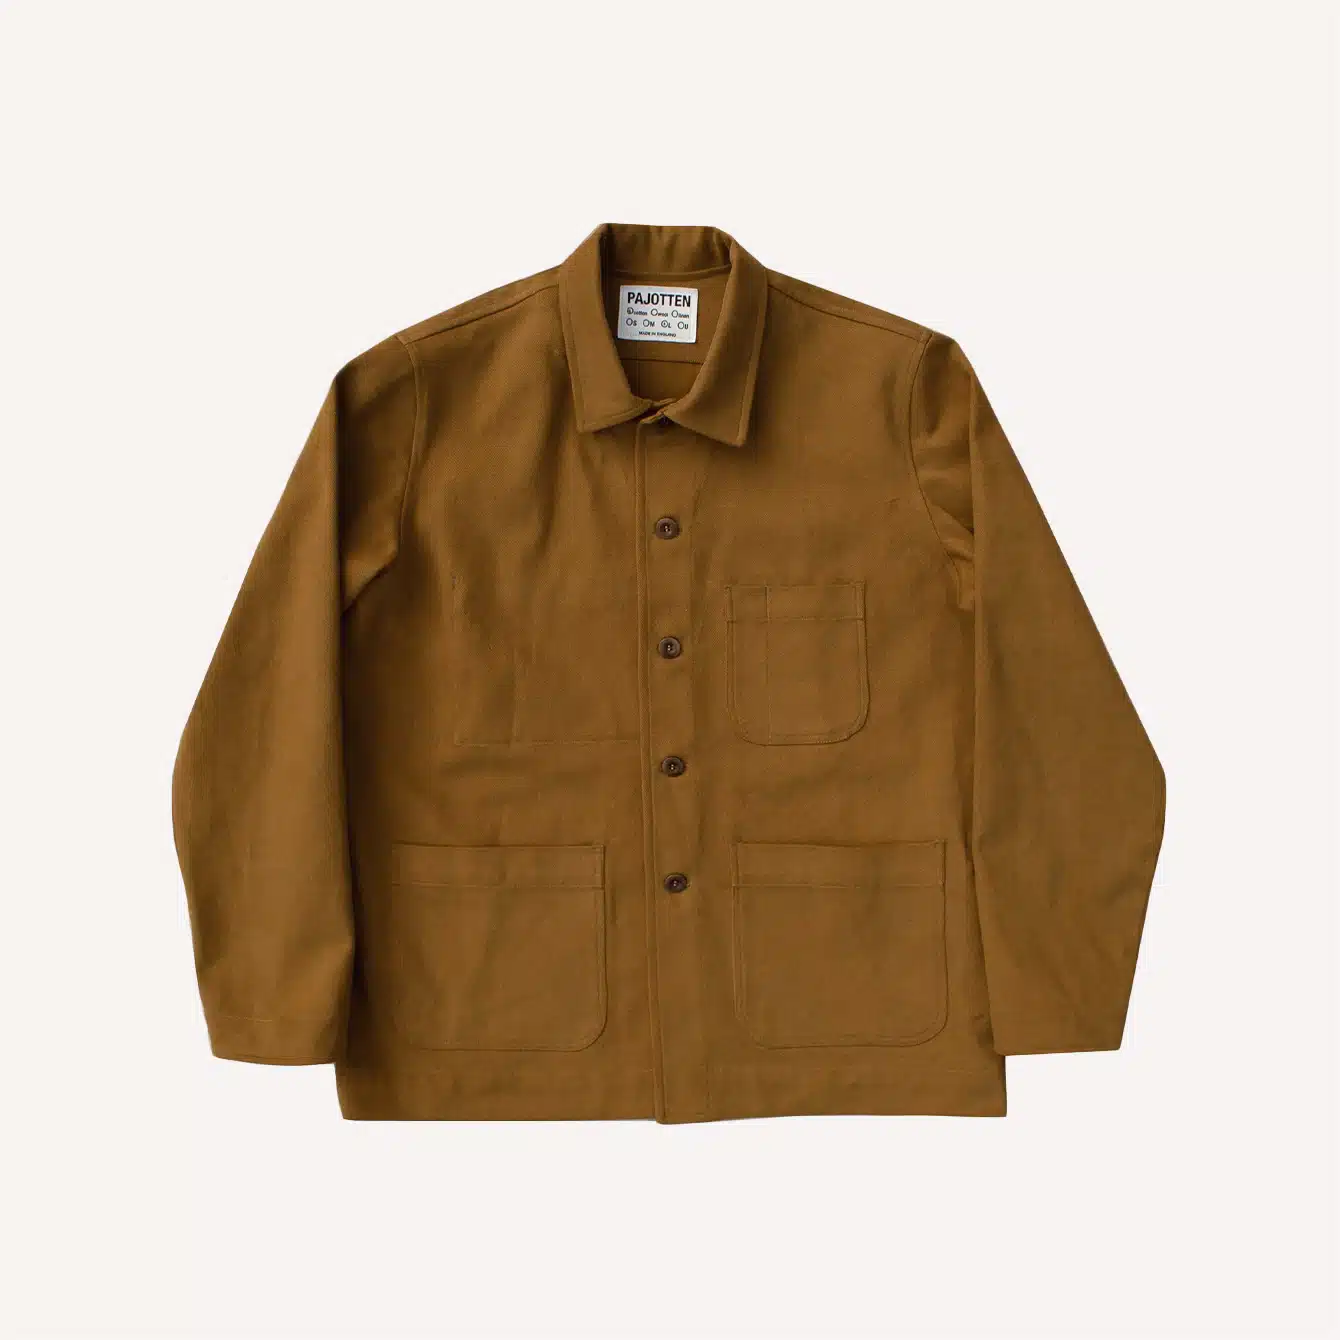 Pajotten Traditional Chore Jacket